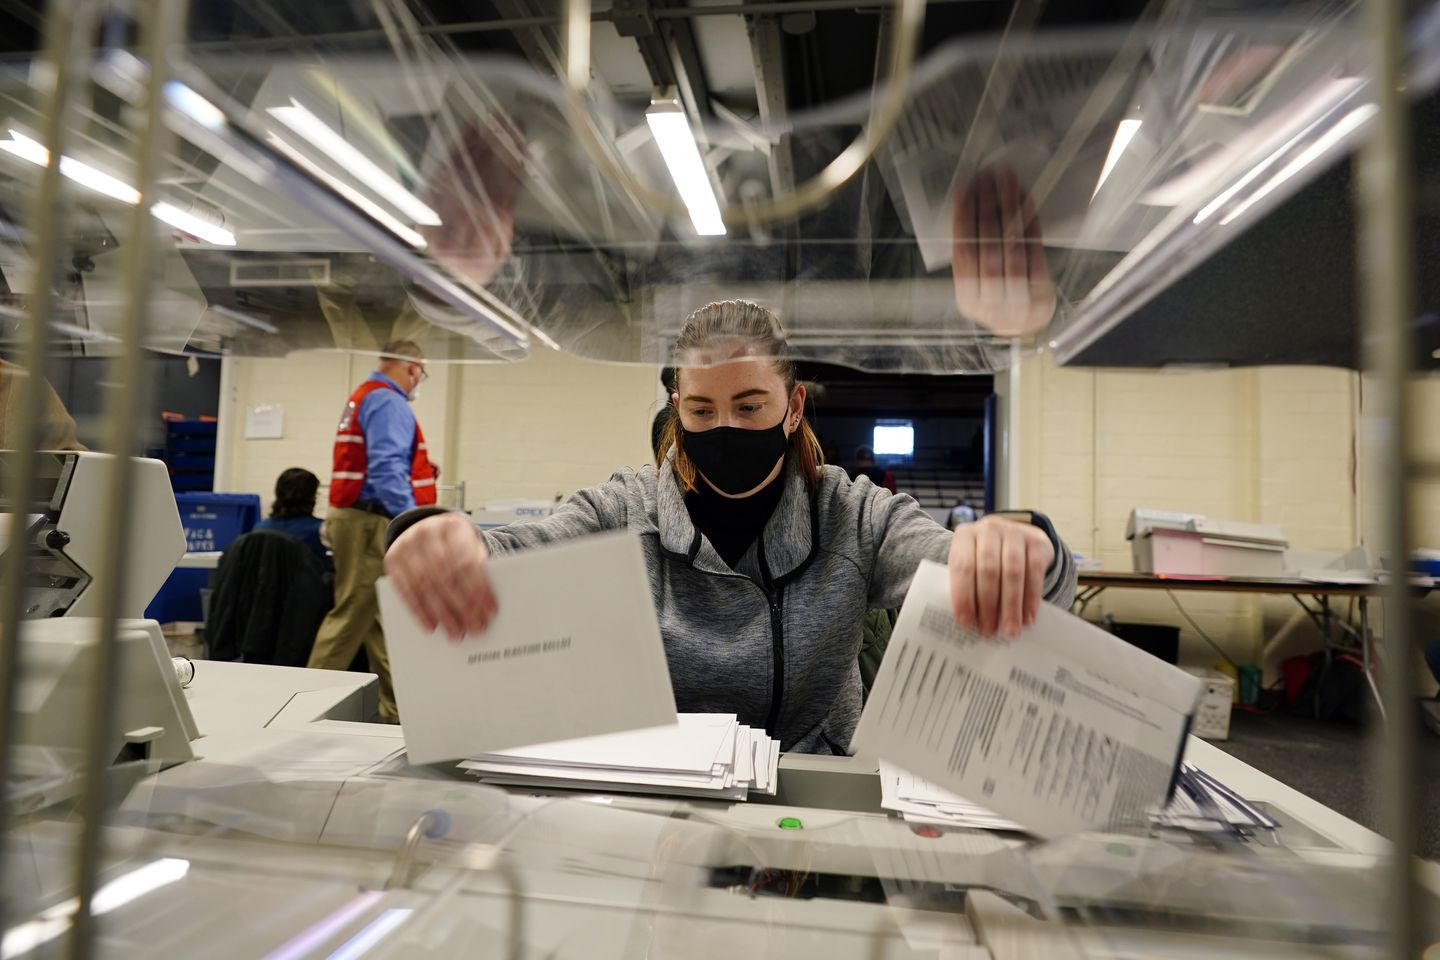 Pennsylvania county Announced Suspension in Vote Counting